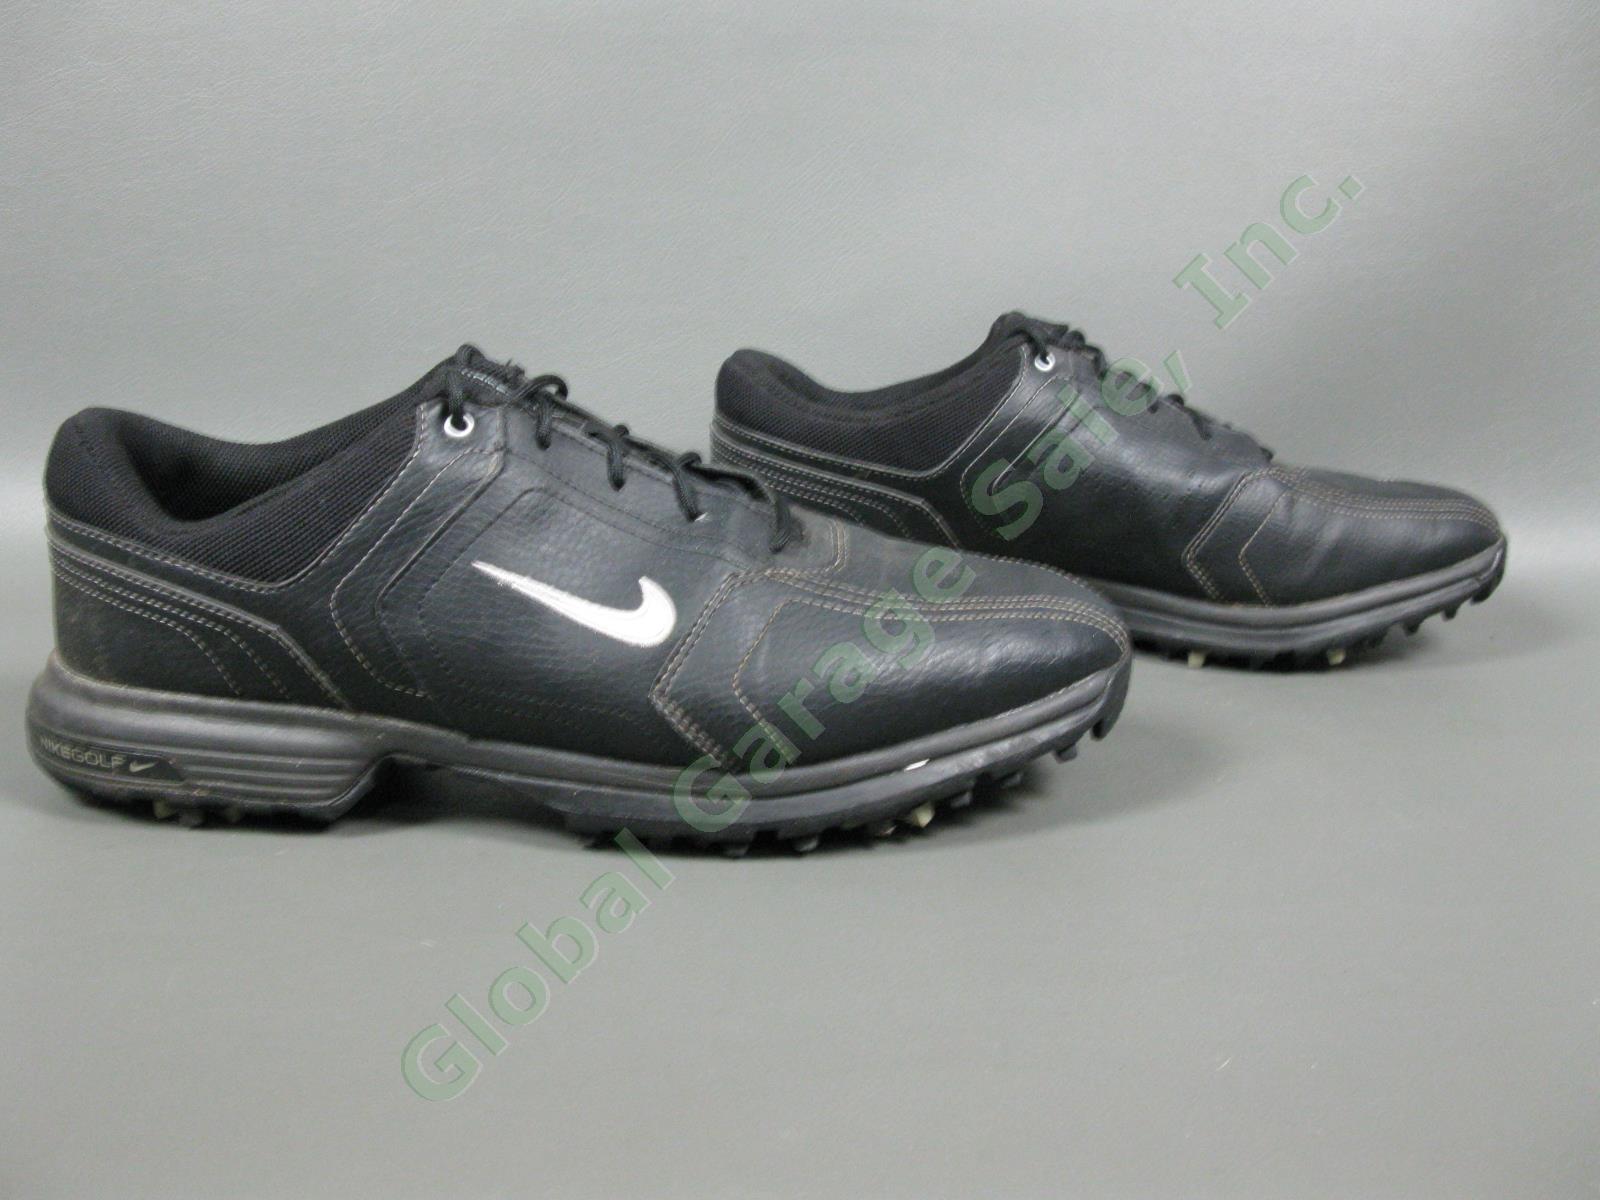 Nike Heritage Mens Leather Golf Shoe Pair Size 10 Black White Athletic Shoes 3